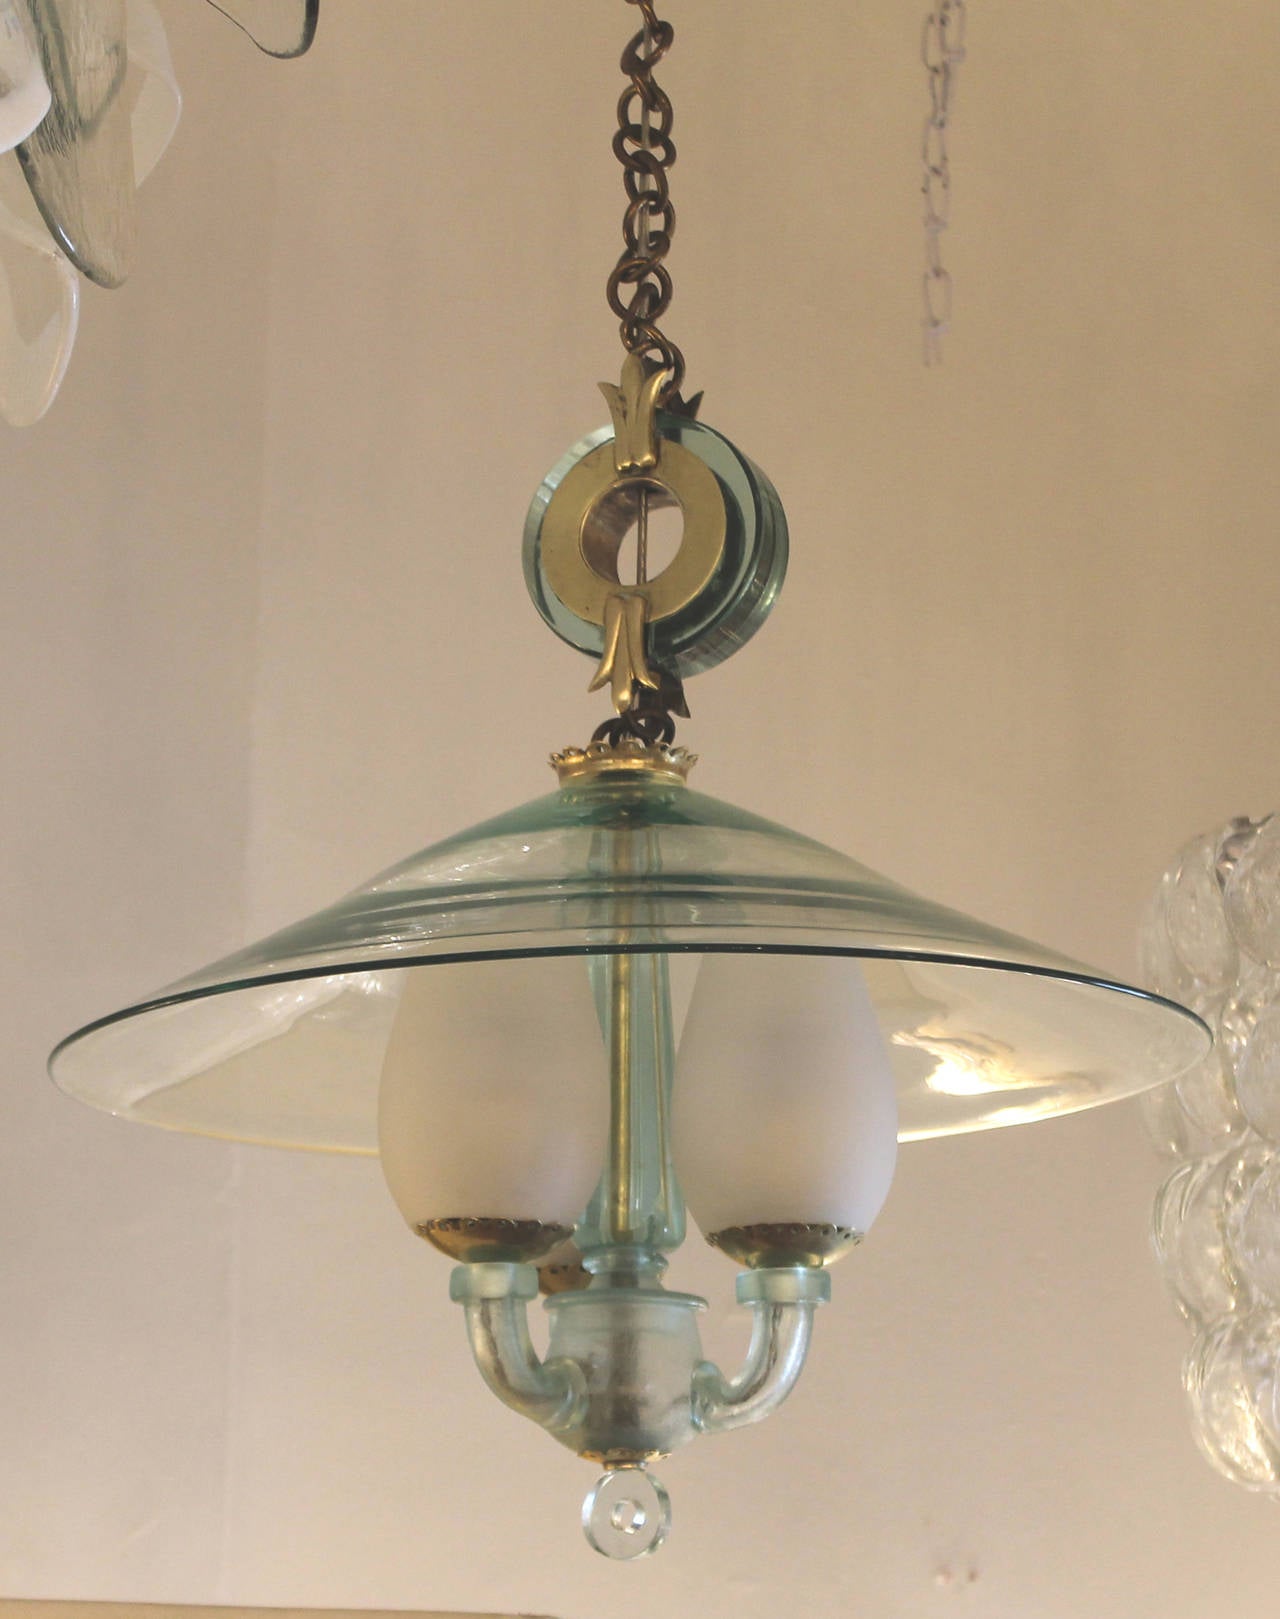 Elegant pendant made with a laguna green glass and brass details. The main section is composed of three glass arms holding small white frosted shades. This whole section is covered a by a larger laguna green glass shade. Holds three candelabra